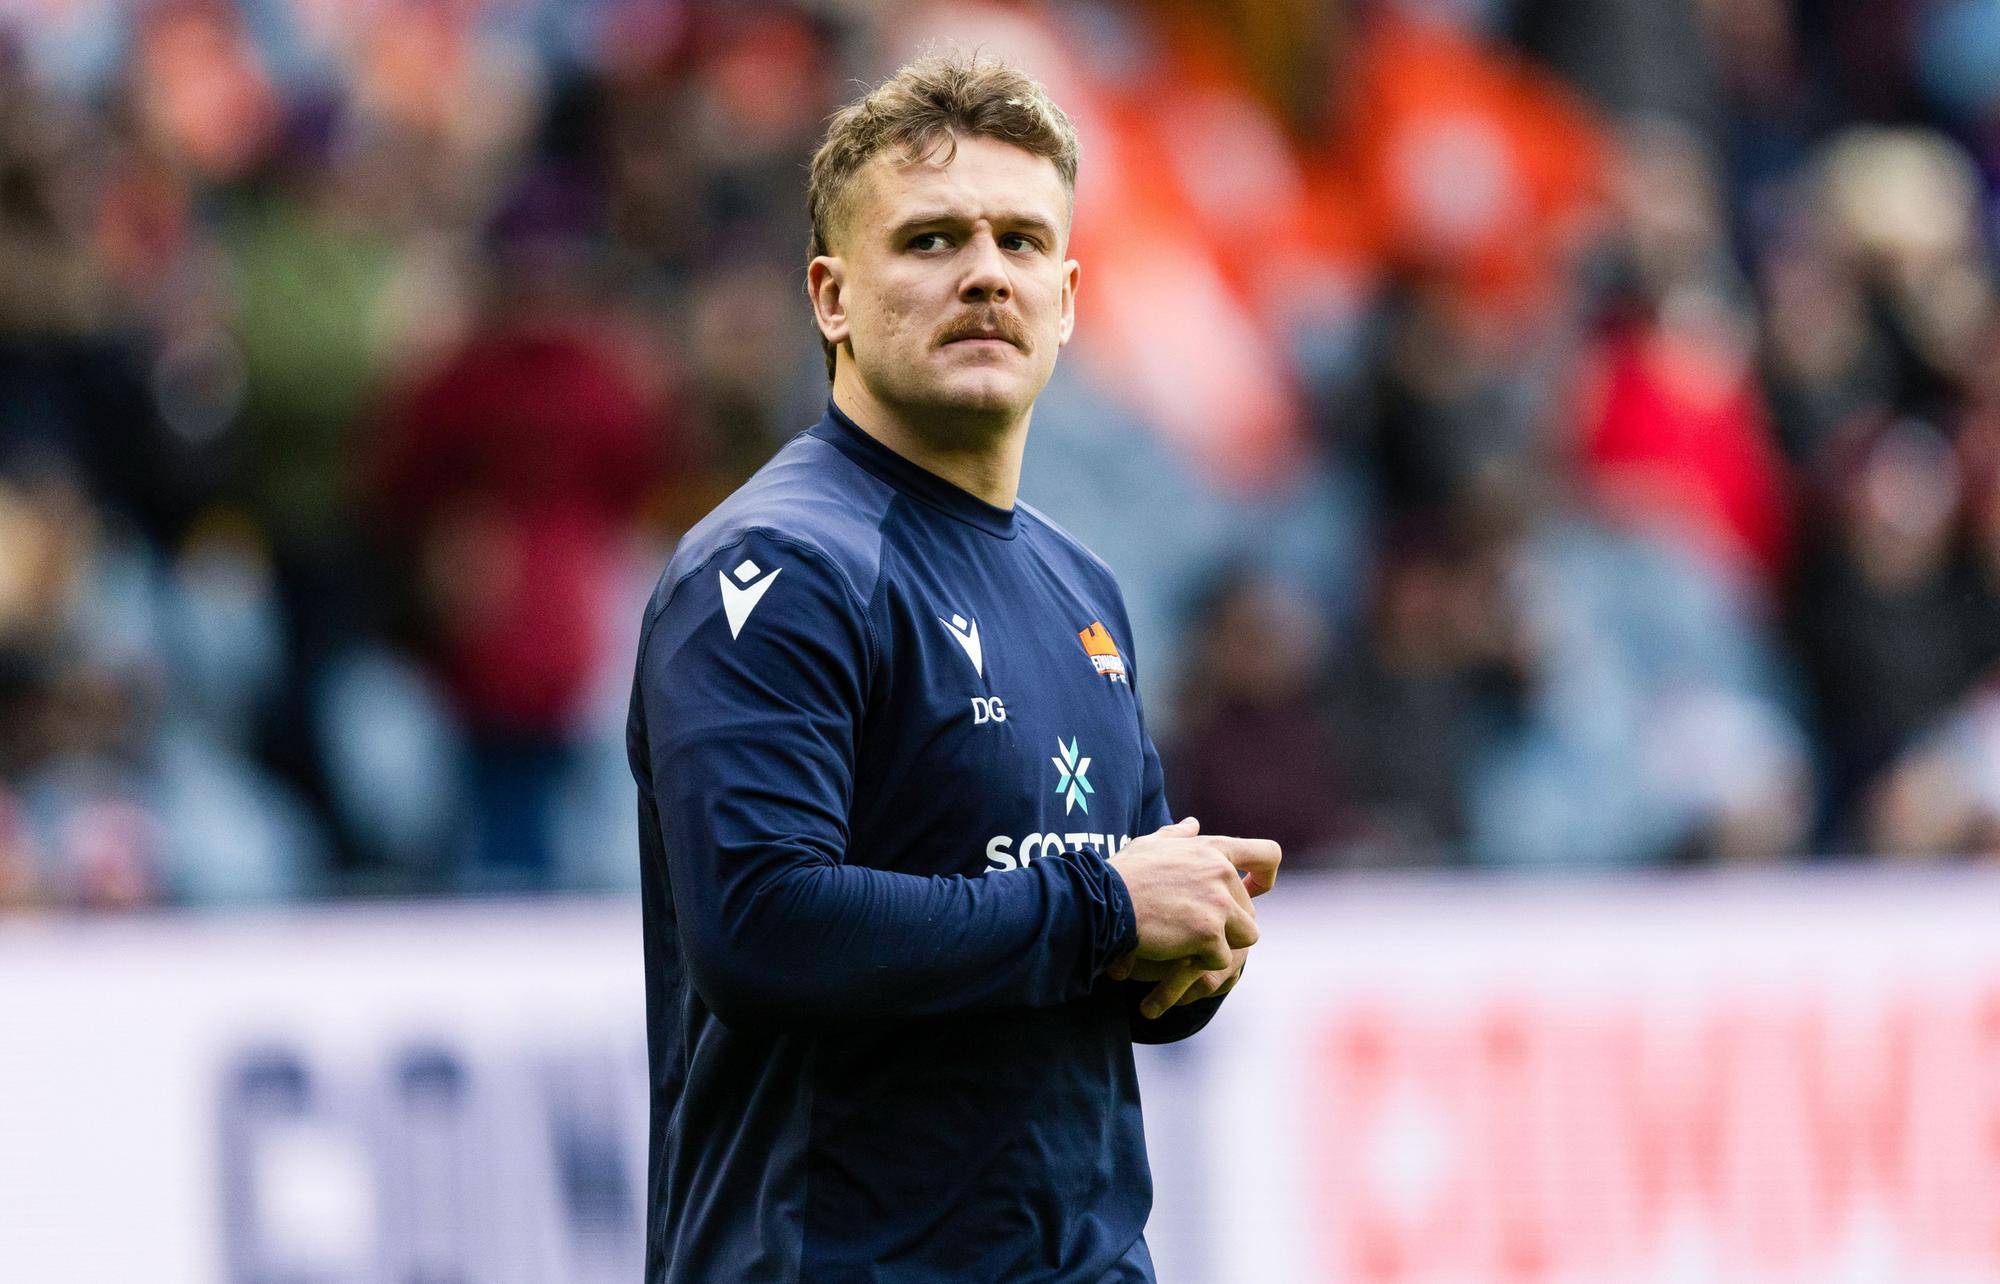 Darcy Graham injured his groin while training with Edinburgh and is unlikely to recover in time to play in this year's Six Nations. (Photo: Ross Parker/SNS Group/SRU)